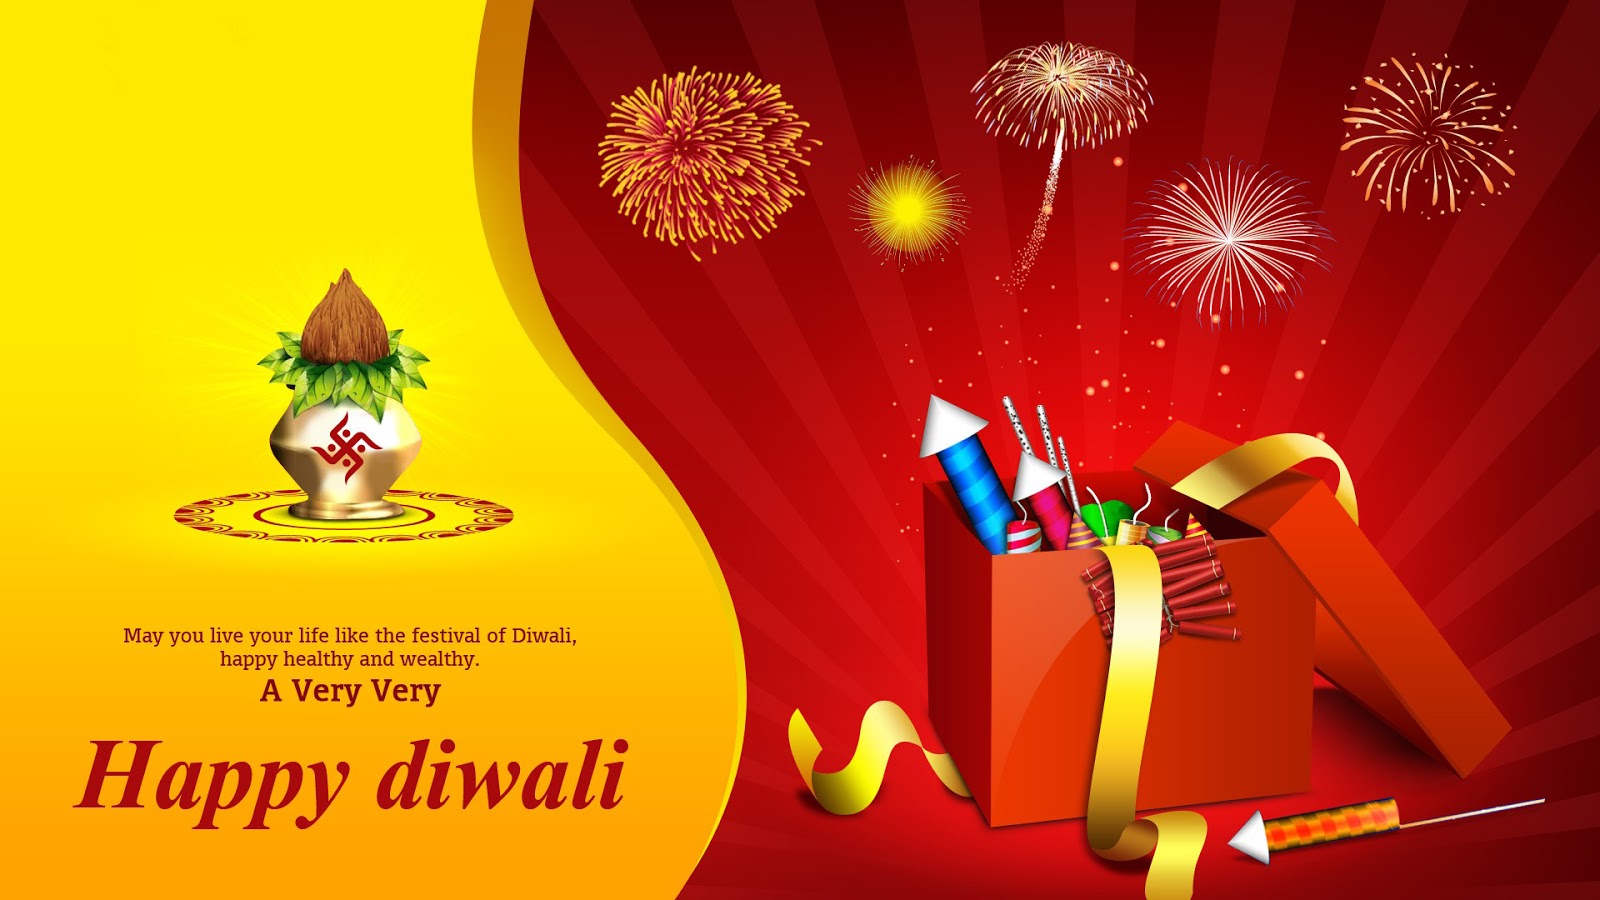 Top Crackers Image For Diwali Carscoops